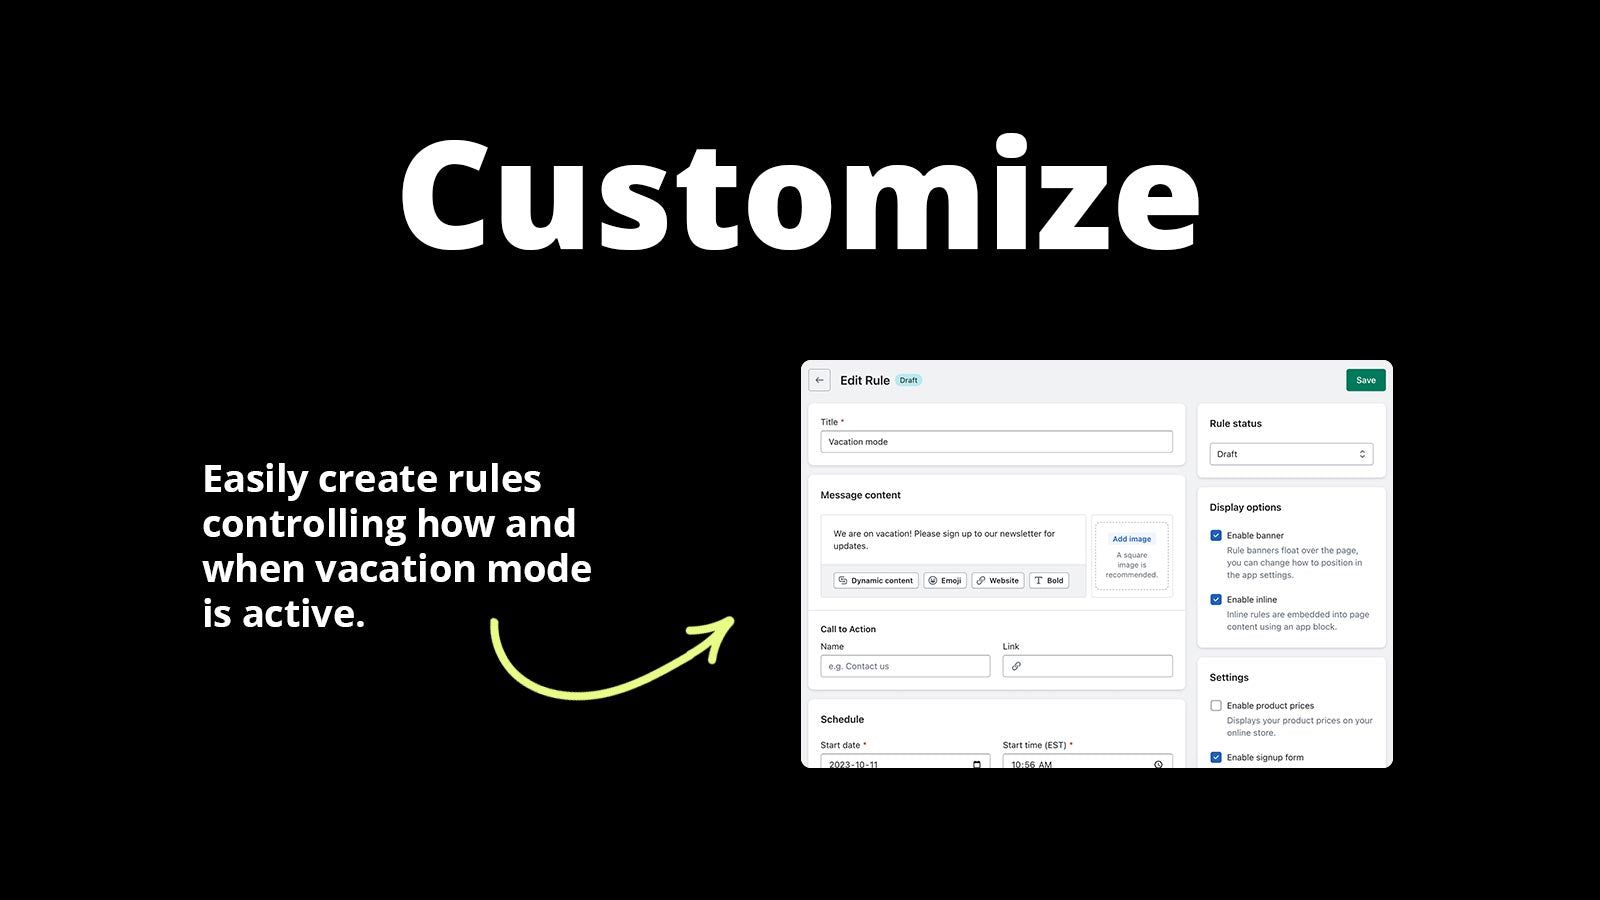 Customize - Easily create rules controlling vacation mode